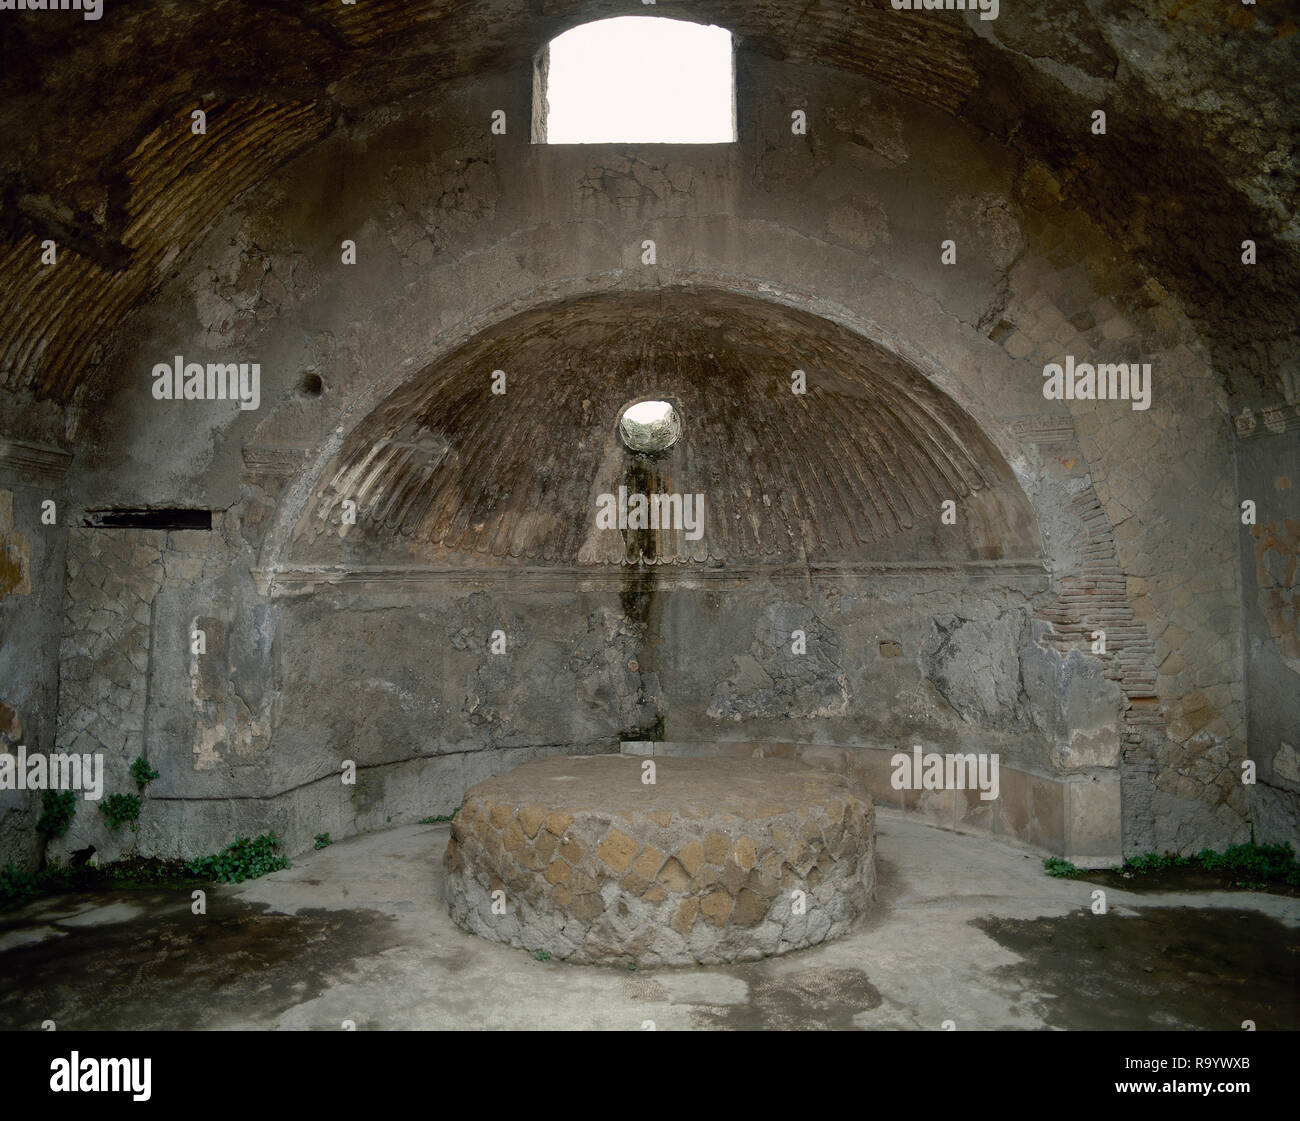 Italy. Herculaneum. Urban baths. The Central Termae. They were built around the beginning of the 1st century AD, and subdivided into sections for men and women. Interior of the male 'caldarium', the hot bath with the 'podium' circular for the 'labrum', large water-filed basin. Campania. Stock Photo